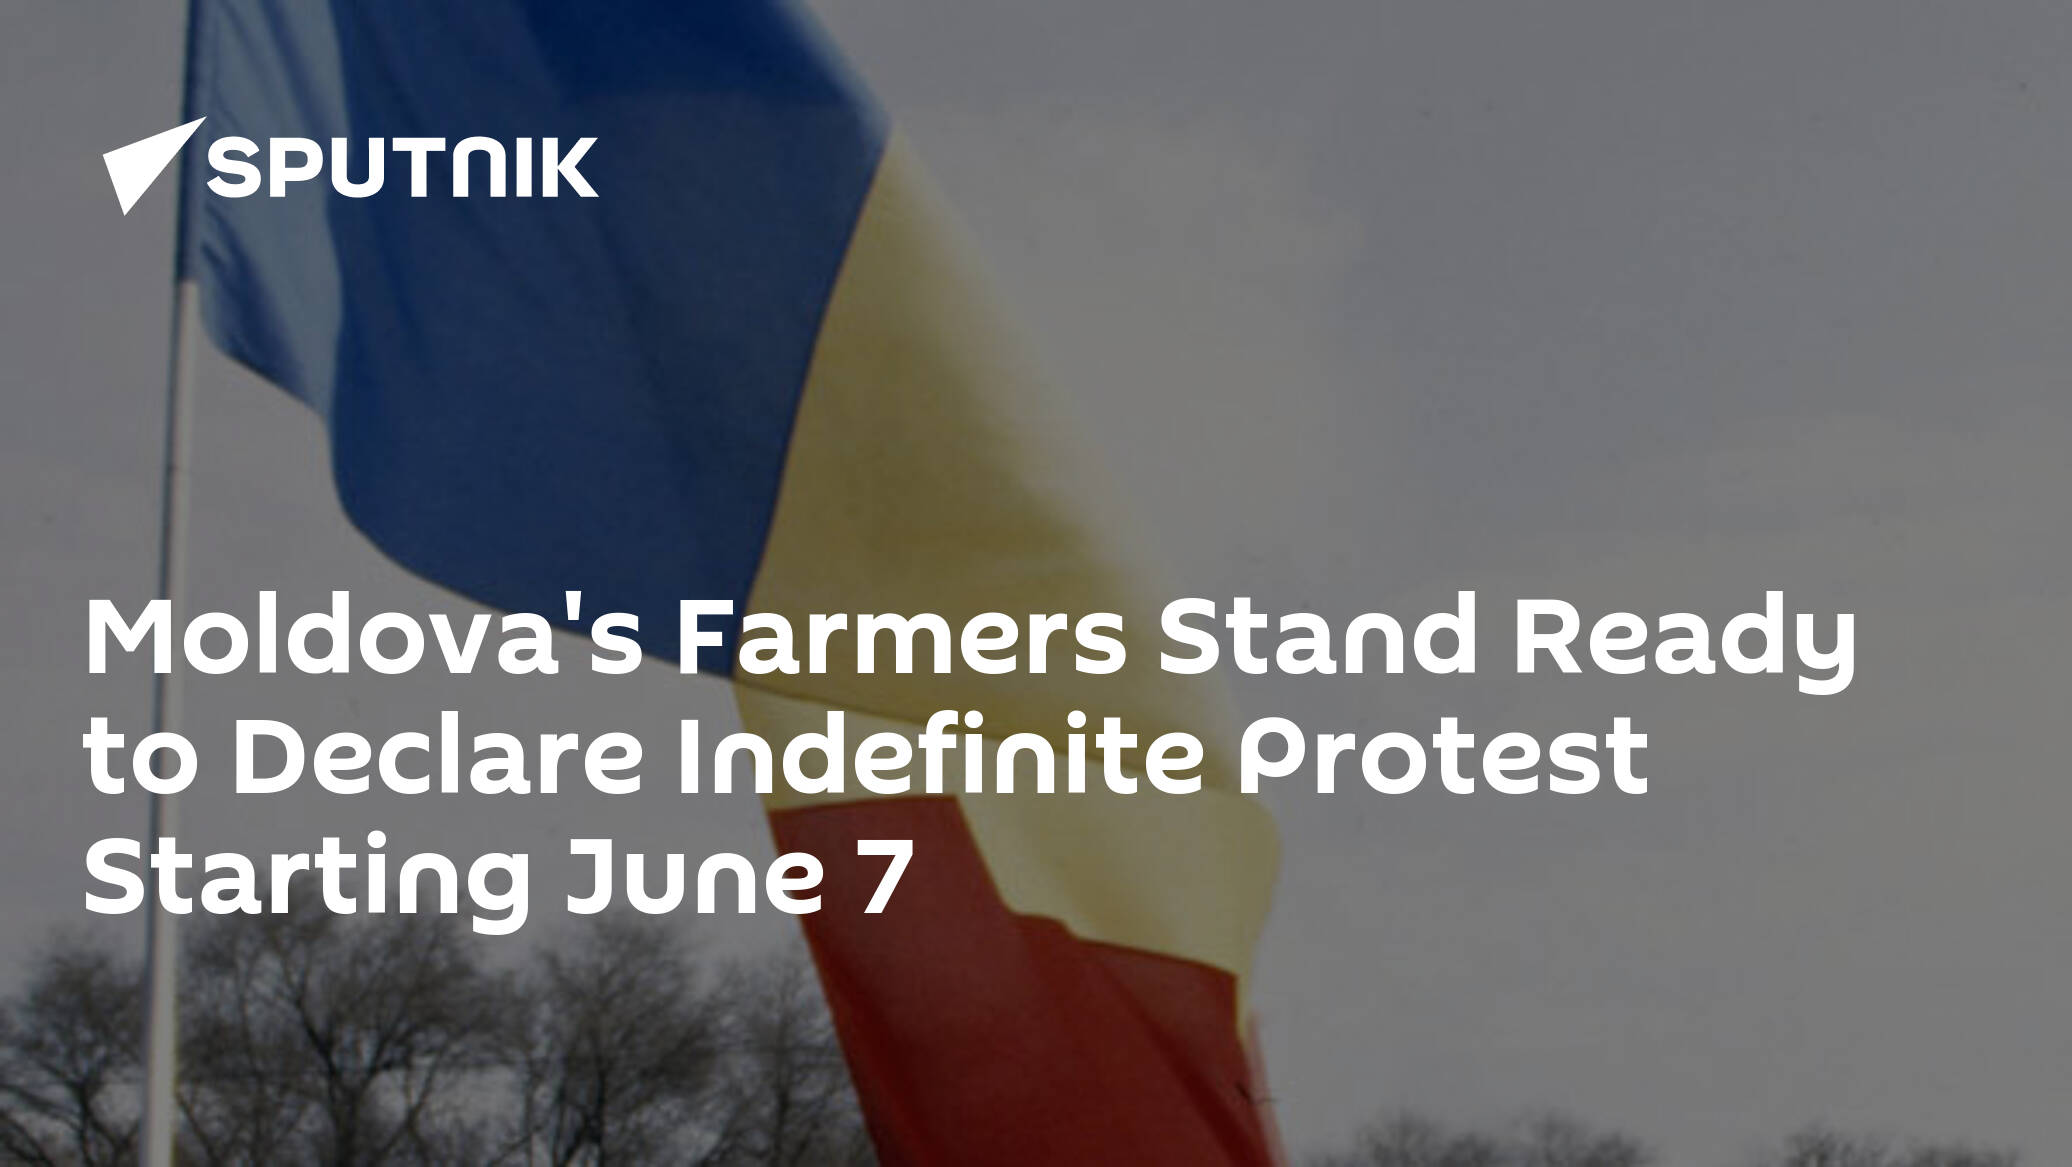 Moldova's Farmers Stand Ready to Declare Indefinite Protest Starting June 7